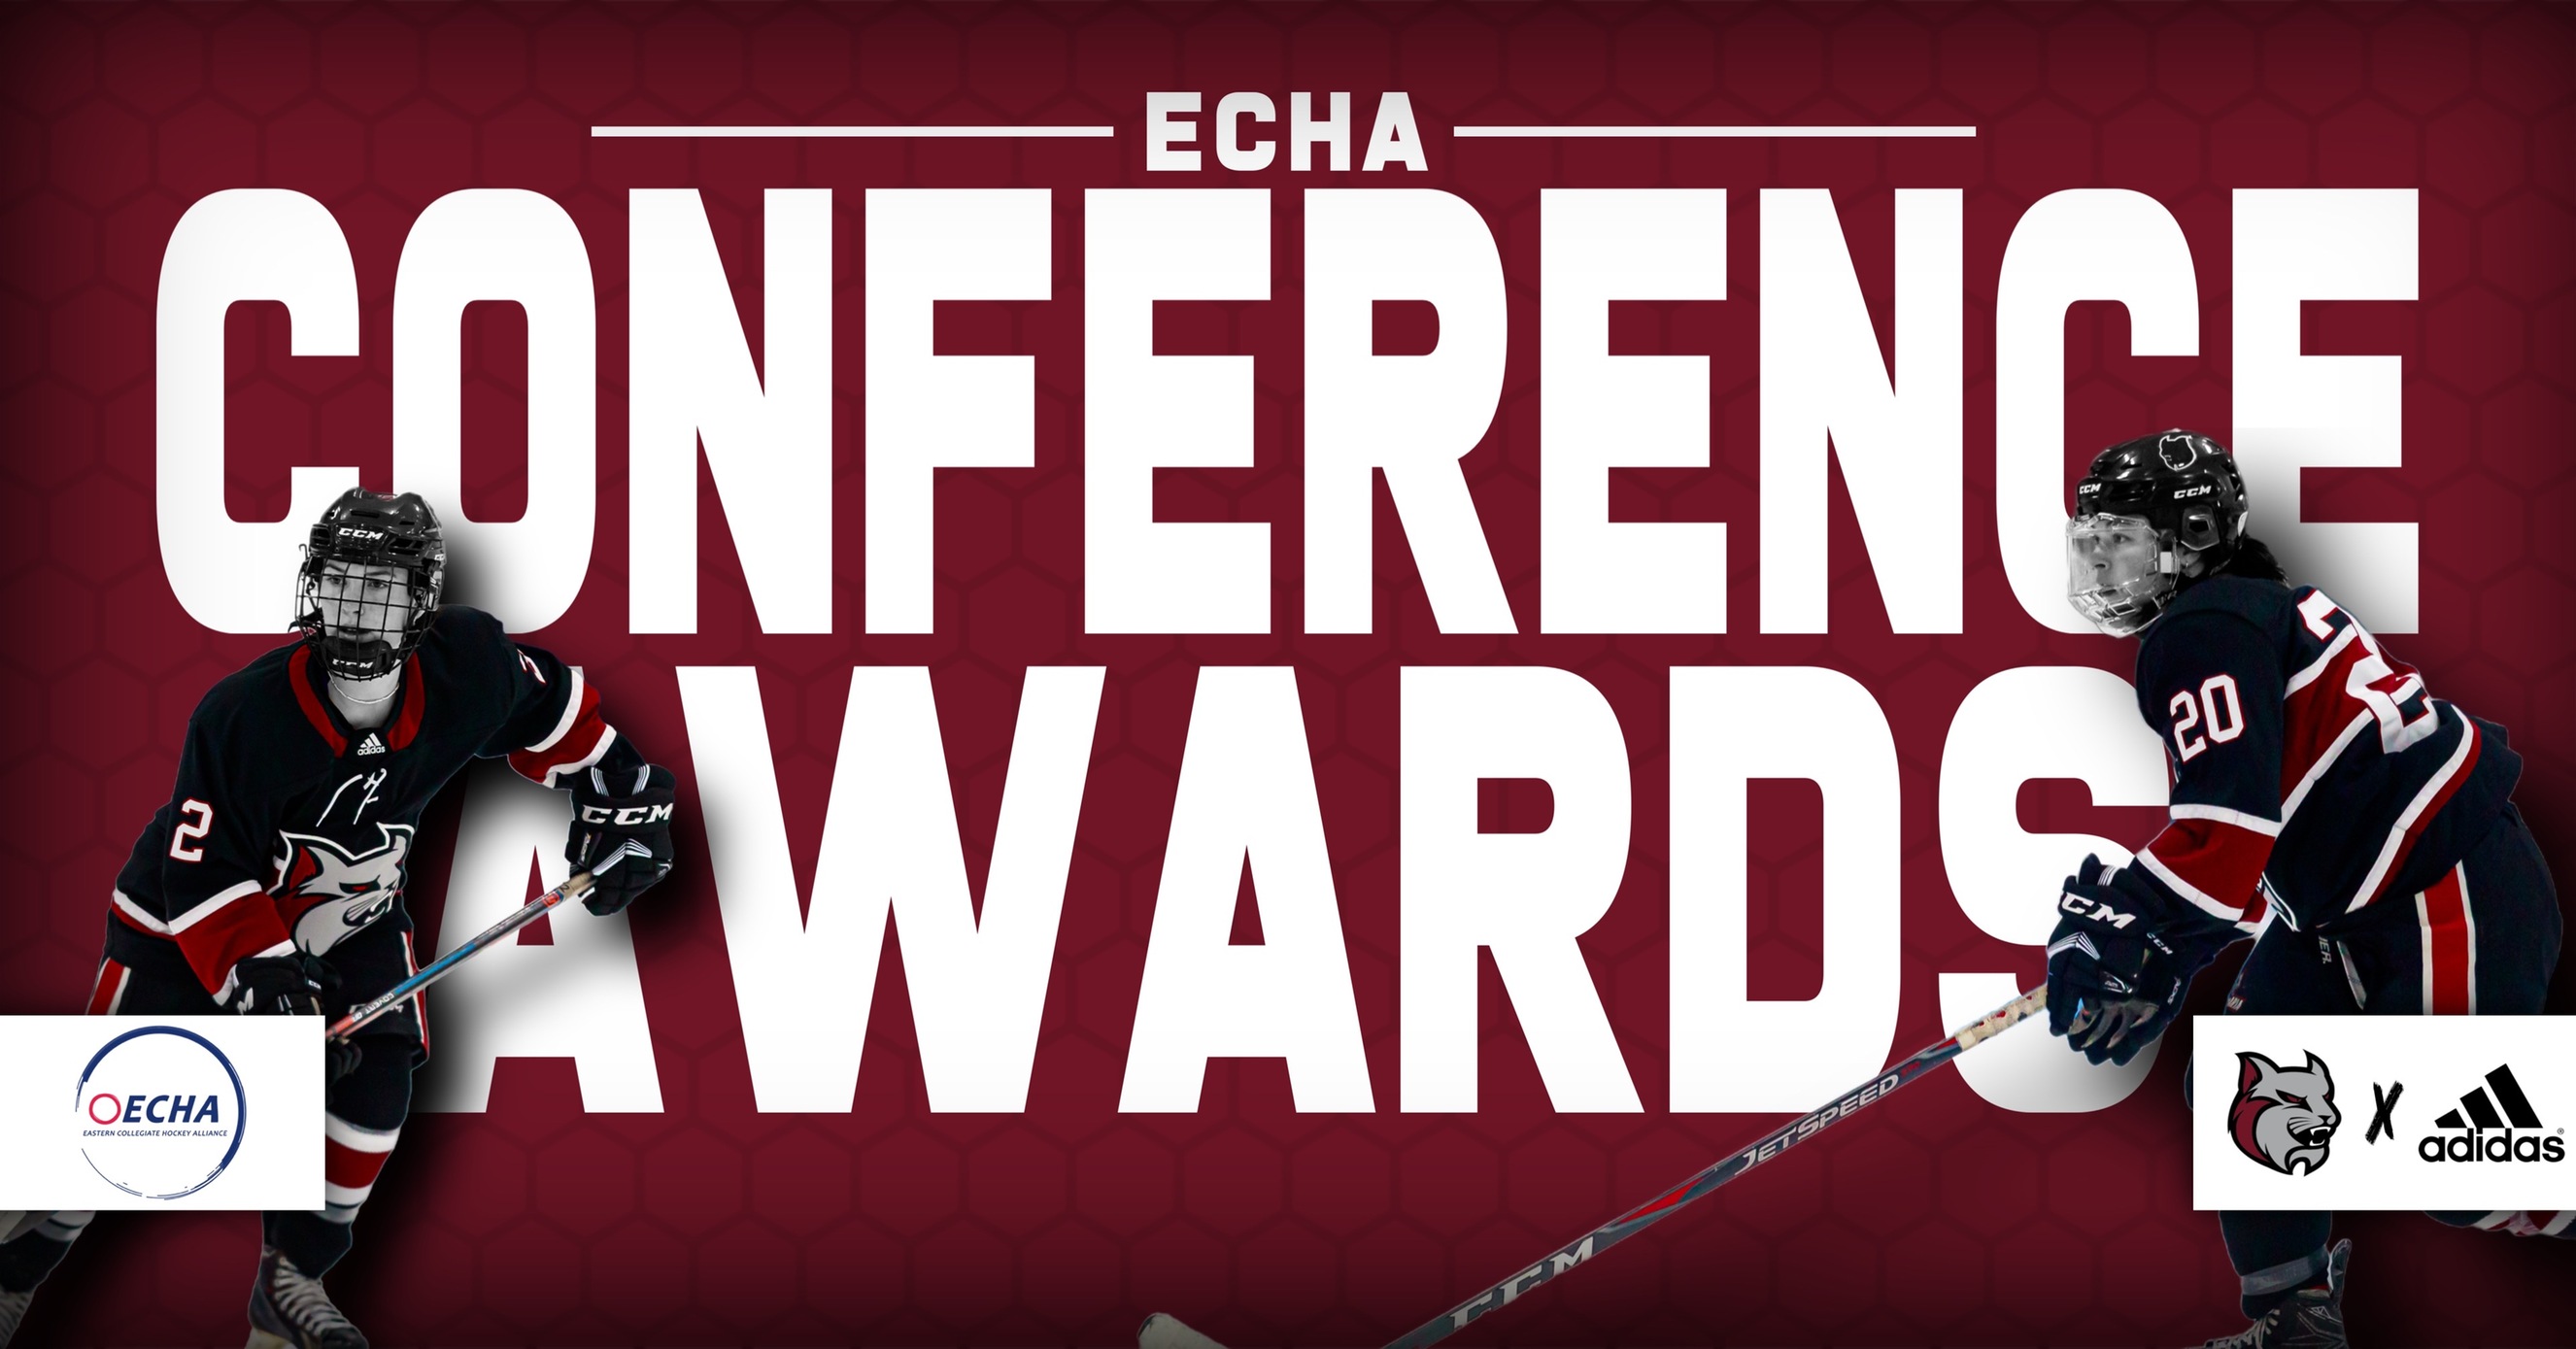 THE EASTERN COLLEGIATE HOCKEY ALLIANCE RECOGNIZES MAJOR AWARD WINNERS AND HONORS ALL-ECHA SELECTIONS